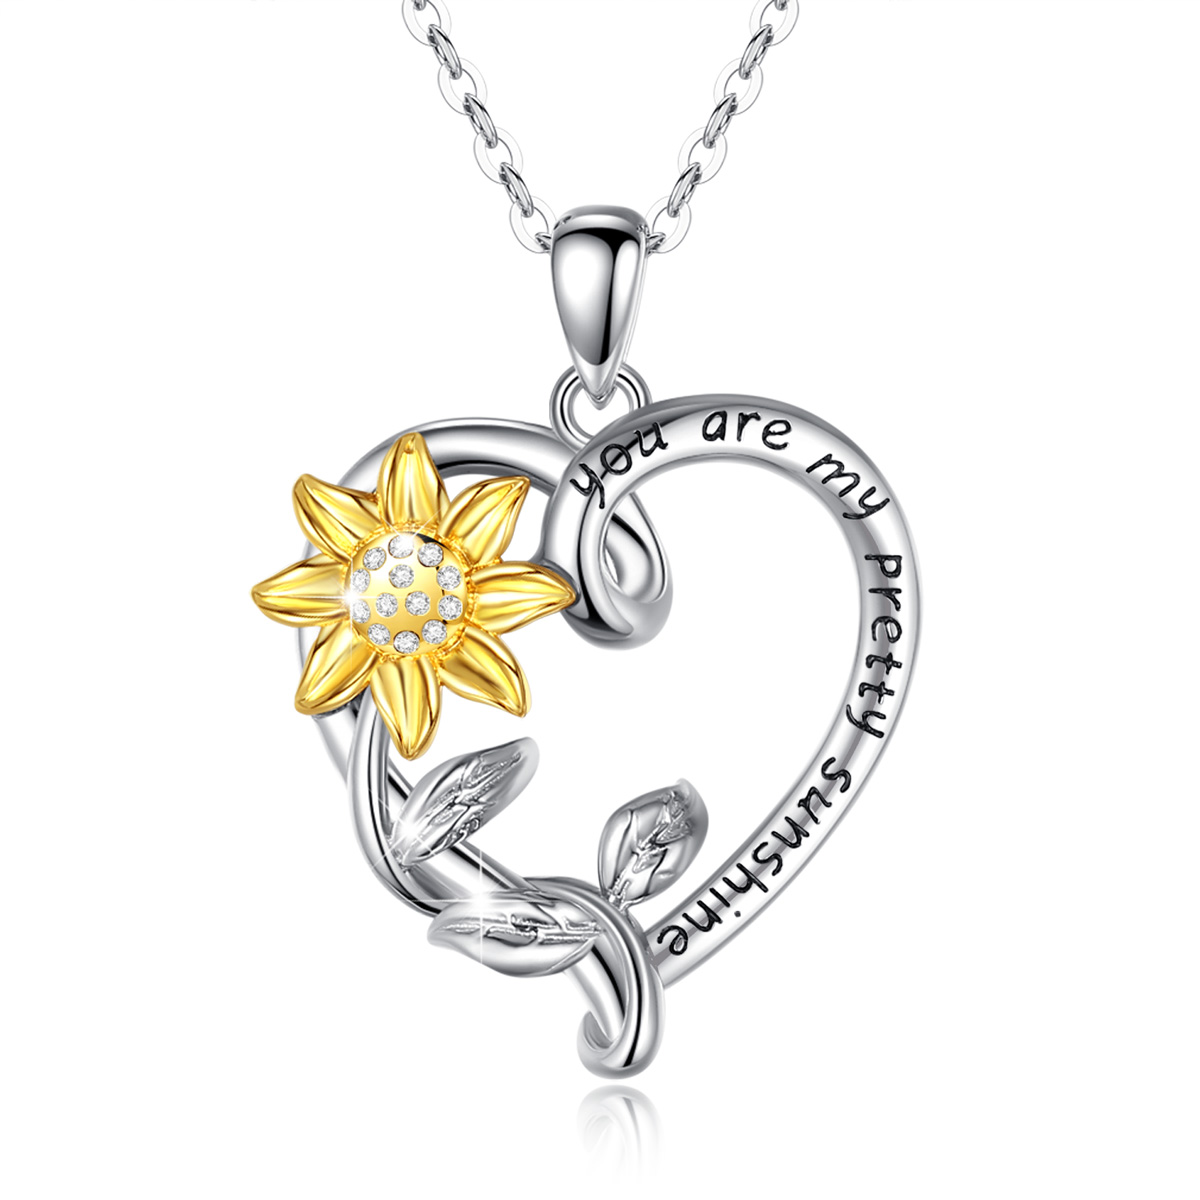 Merryshine Jewelry You Are My Sunshine Gold Sunflower Heart Shape Pendant Necklace For Girlfriend Friendship Gift